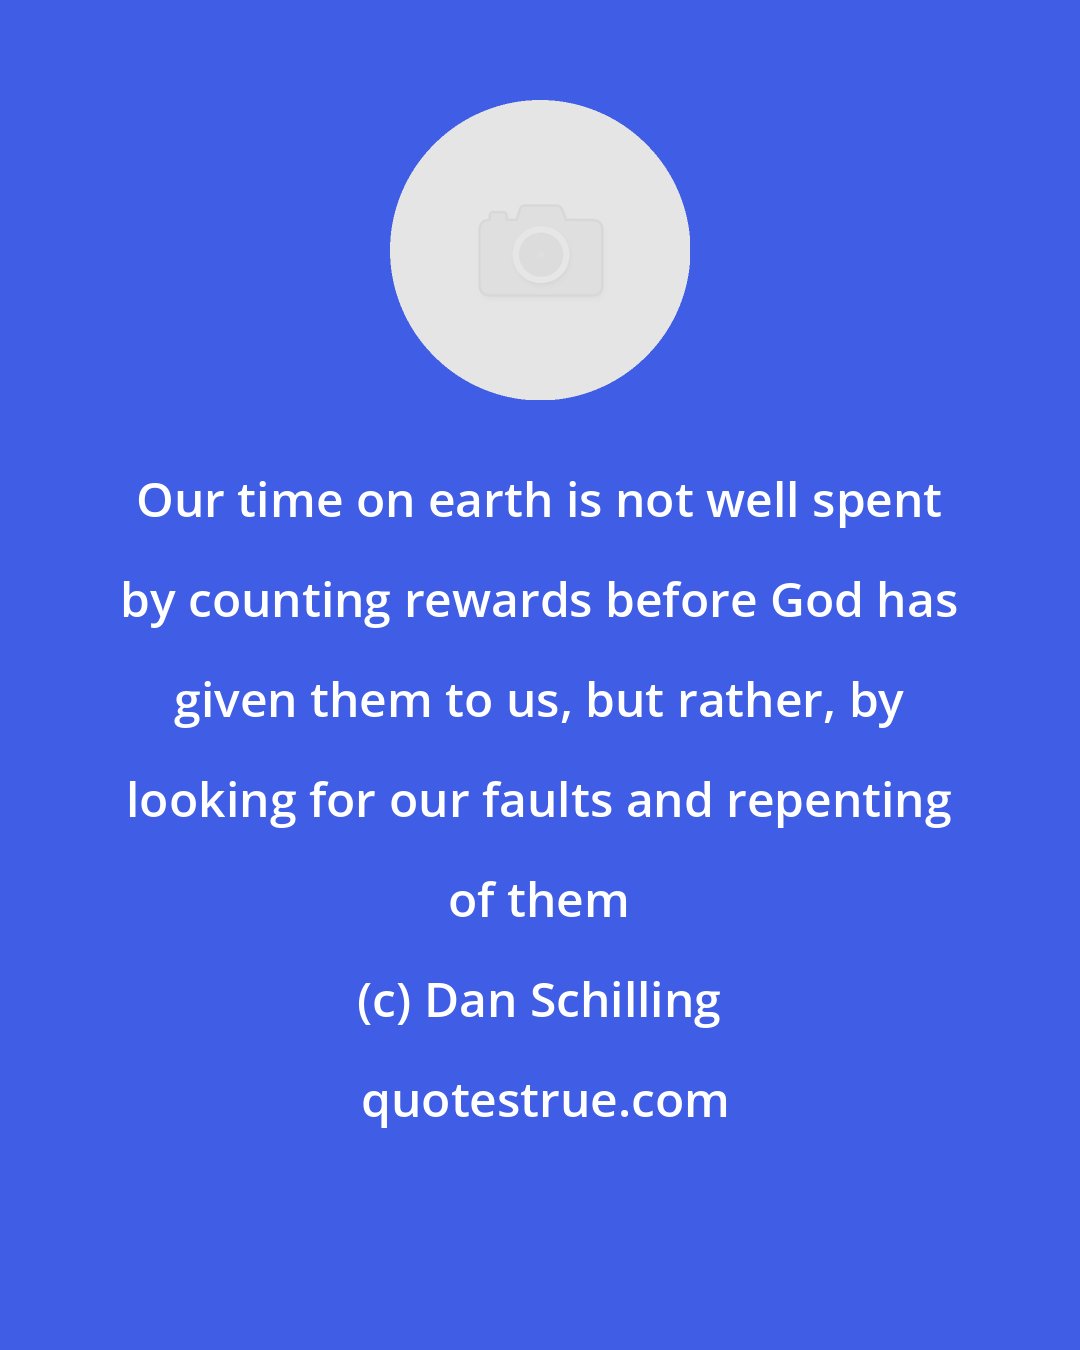 Dan Schilling: Our time on earth is not well spent by counting rewards before God has given them to us, but rather, by looking for our faults and repenting of them